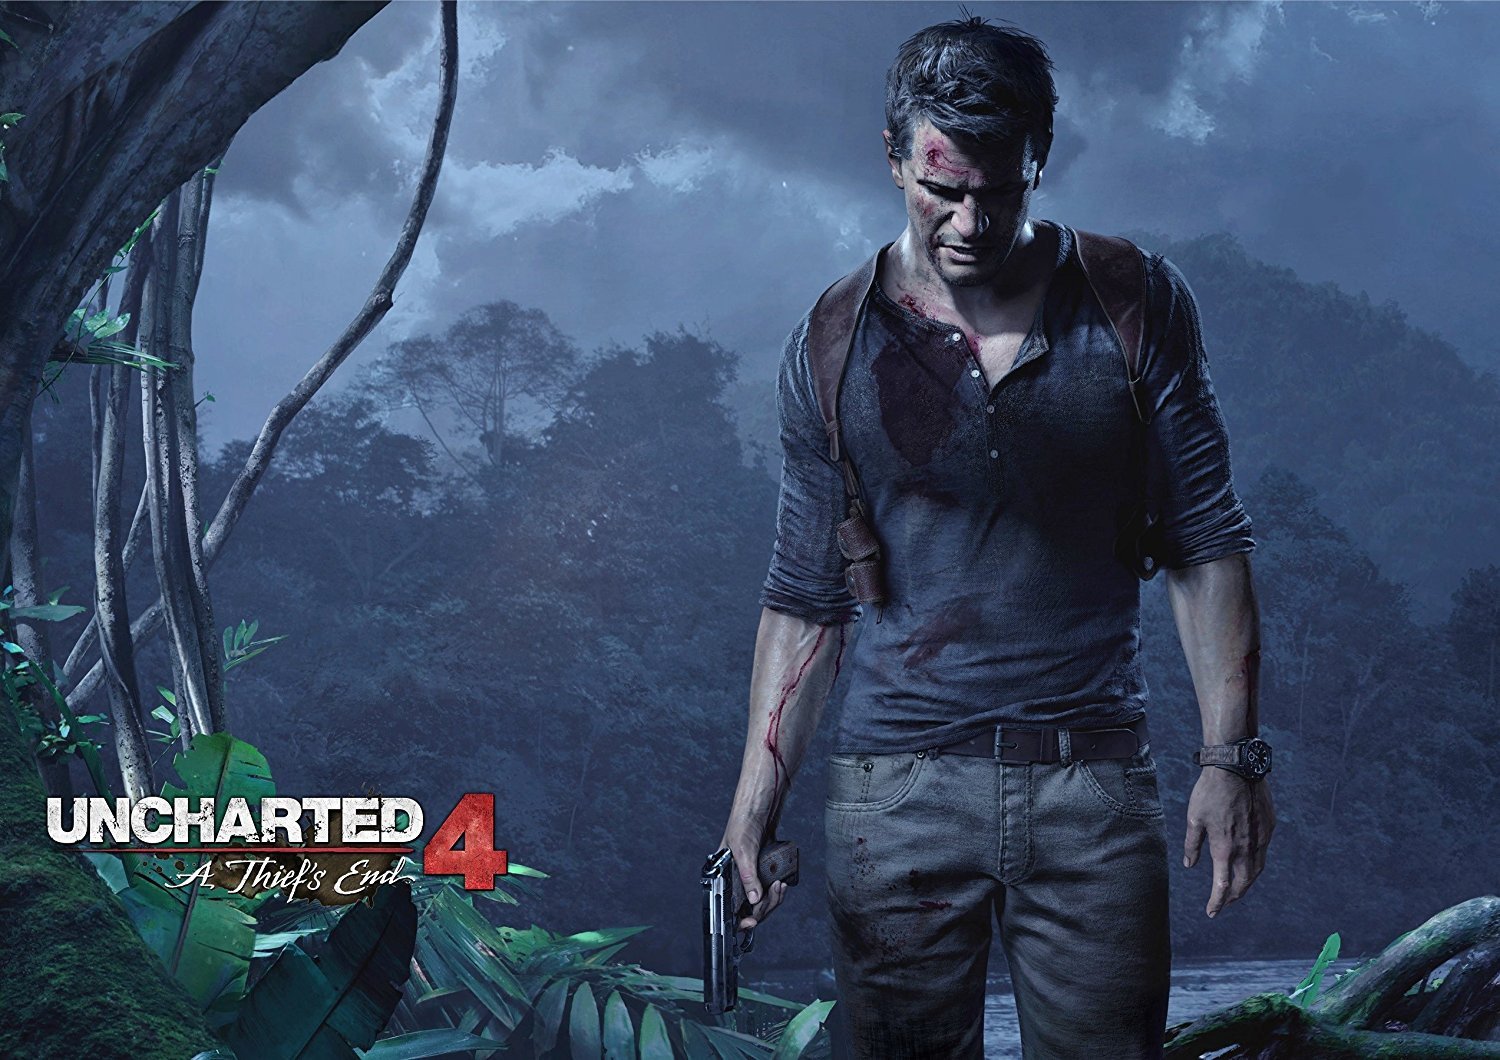 UNCHARTED 4: A Thief's End (5/10/2016) - Story Trailer